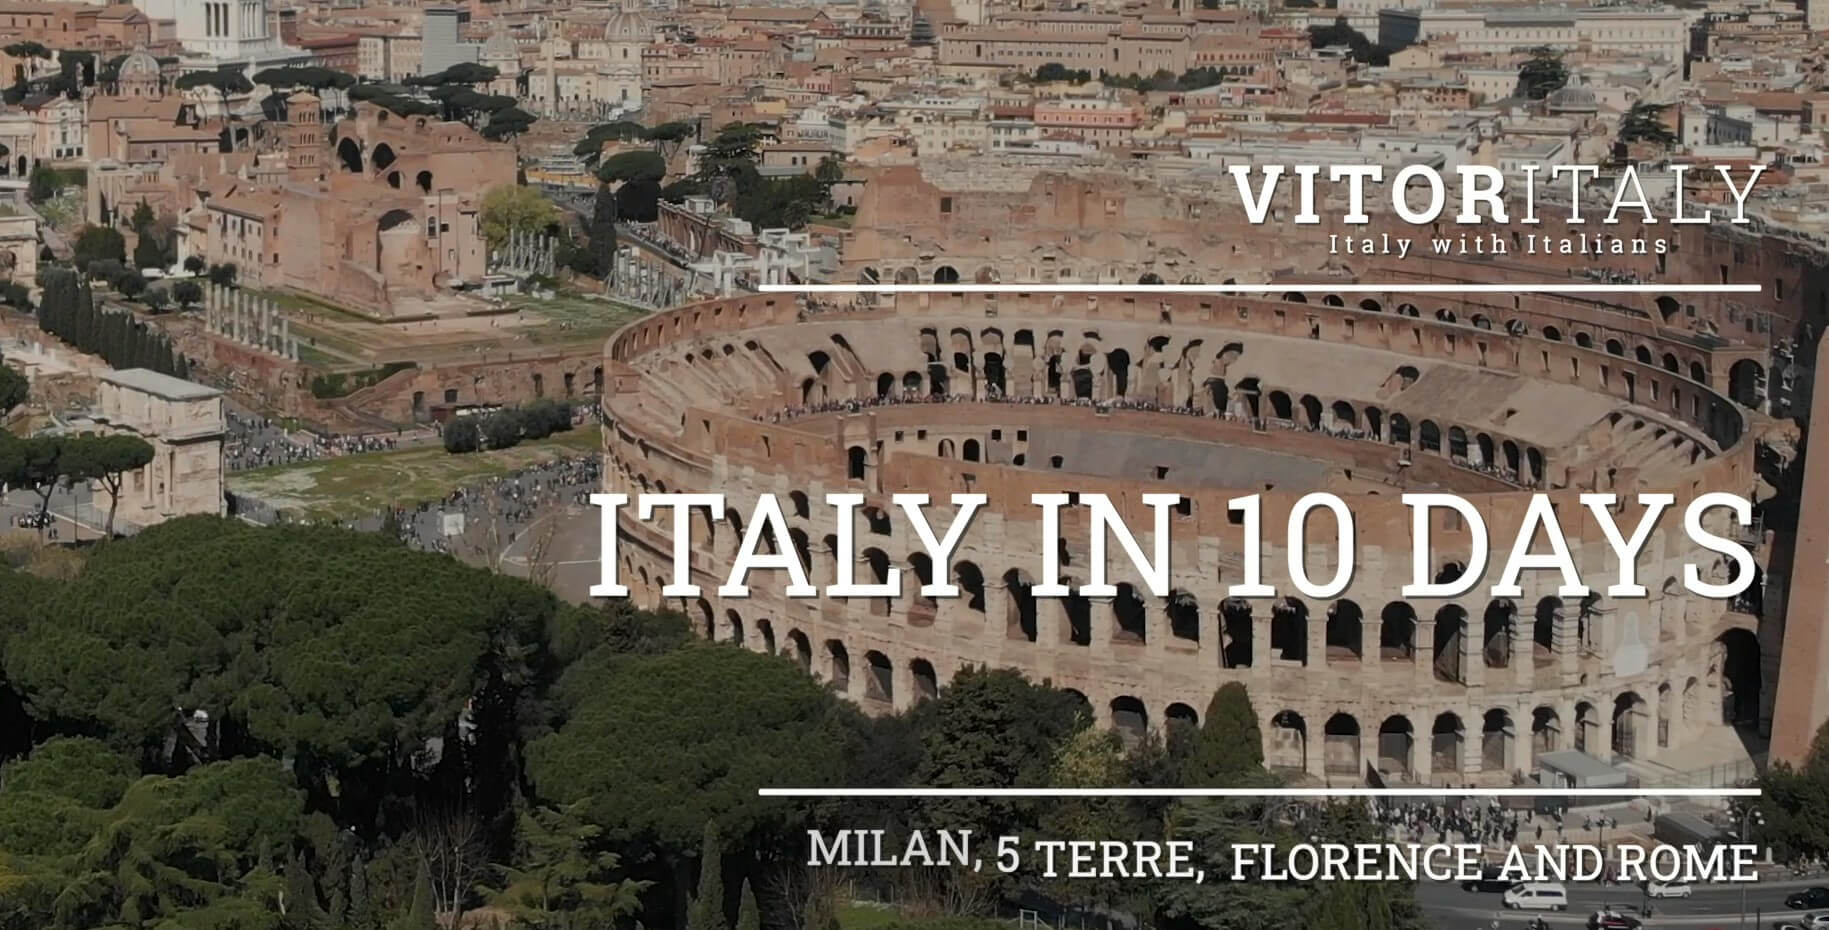 ITALY IN 10 DAYS PRIVATE TOUR - Milan, Cinque Terre, Florence and Rome